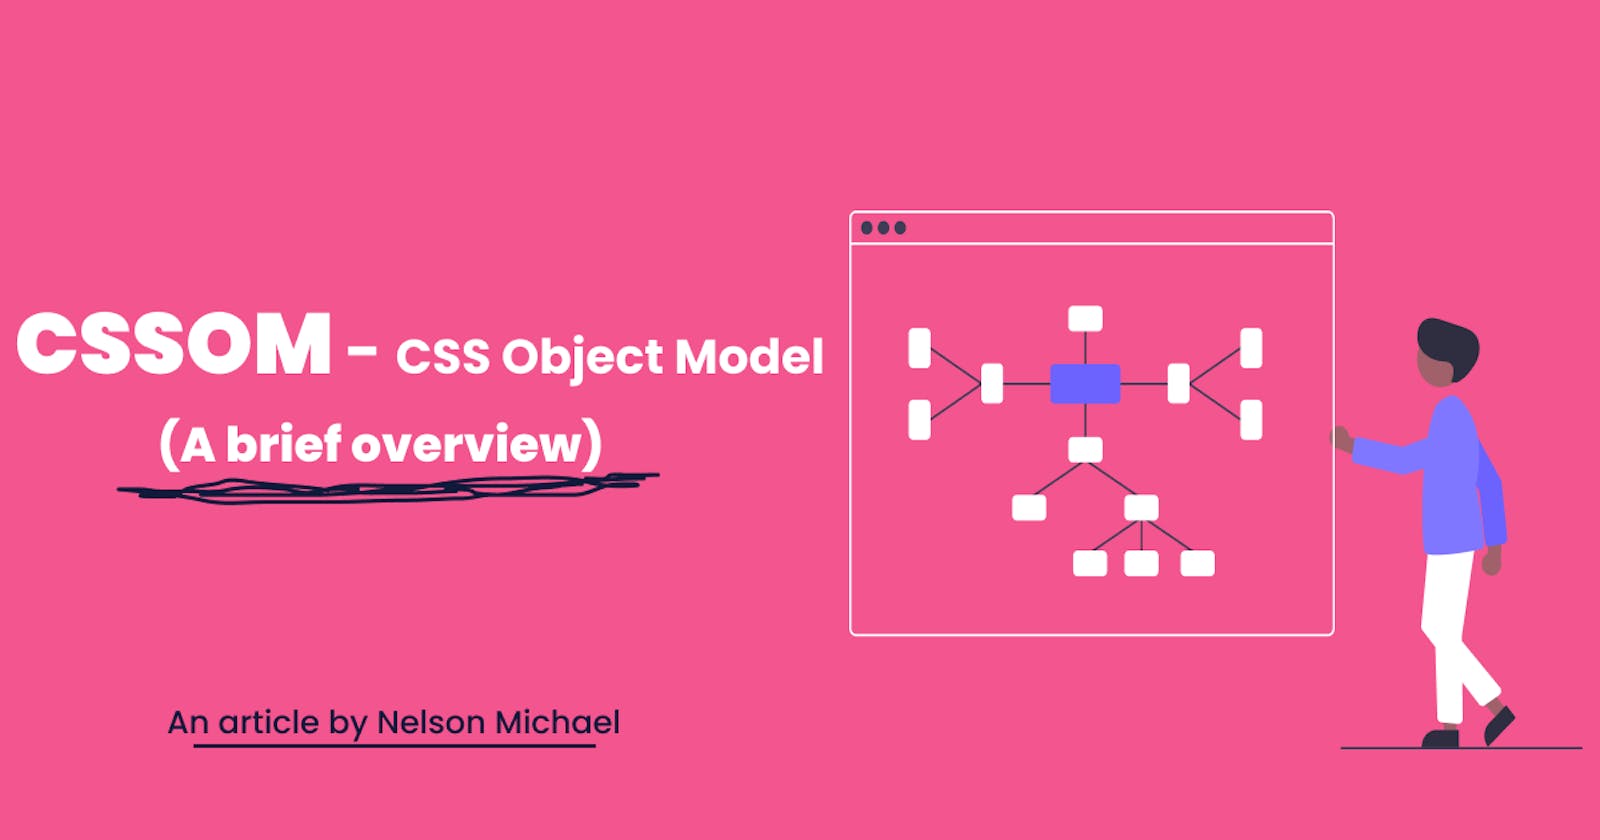 CSSOM - CSS Object Model (A brief overview)